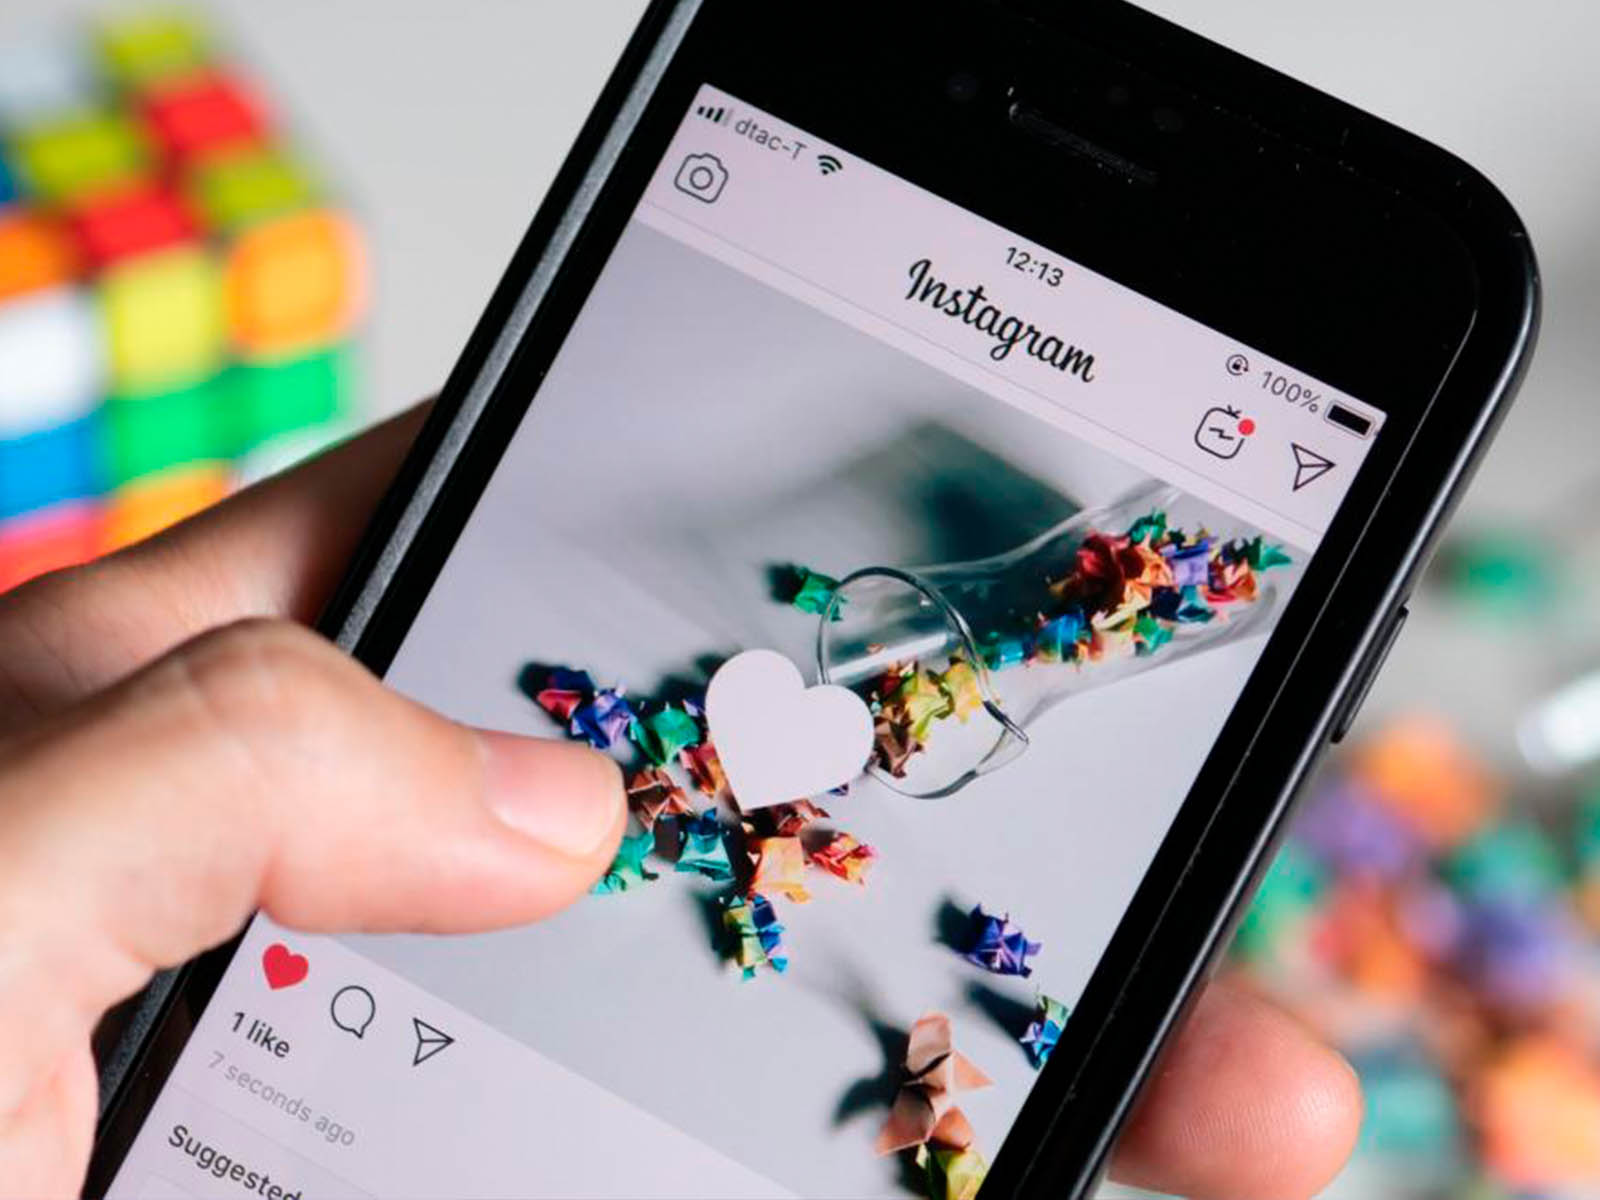 Soon you’ll be able to add a song to your Instagram profile